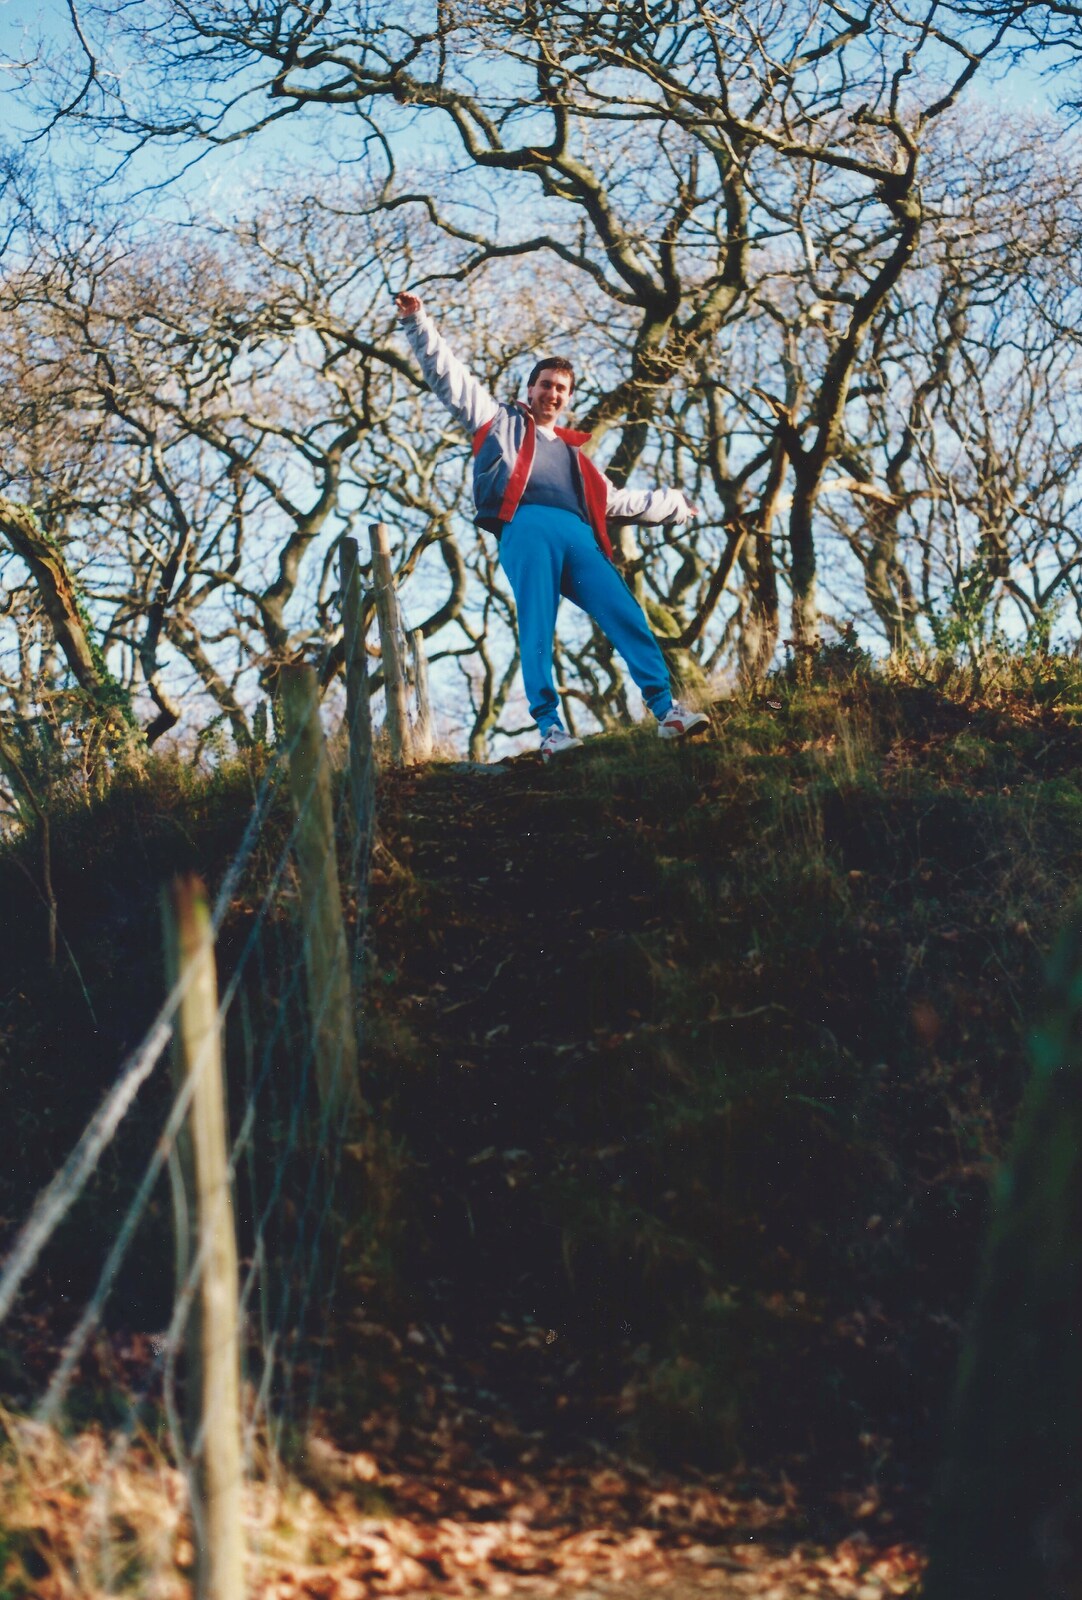 Riki waves from the top of a hill from Uni: A Ride on the Plym Valley Cycle Path, Plymstock, Devon - 26th February 1989